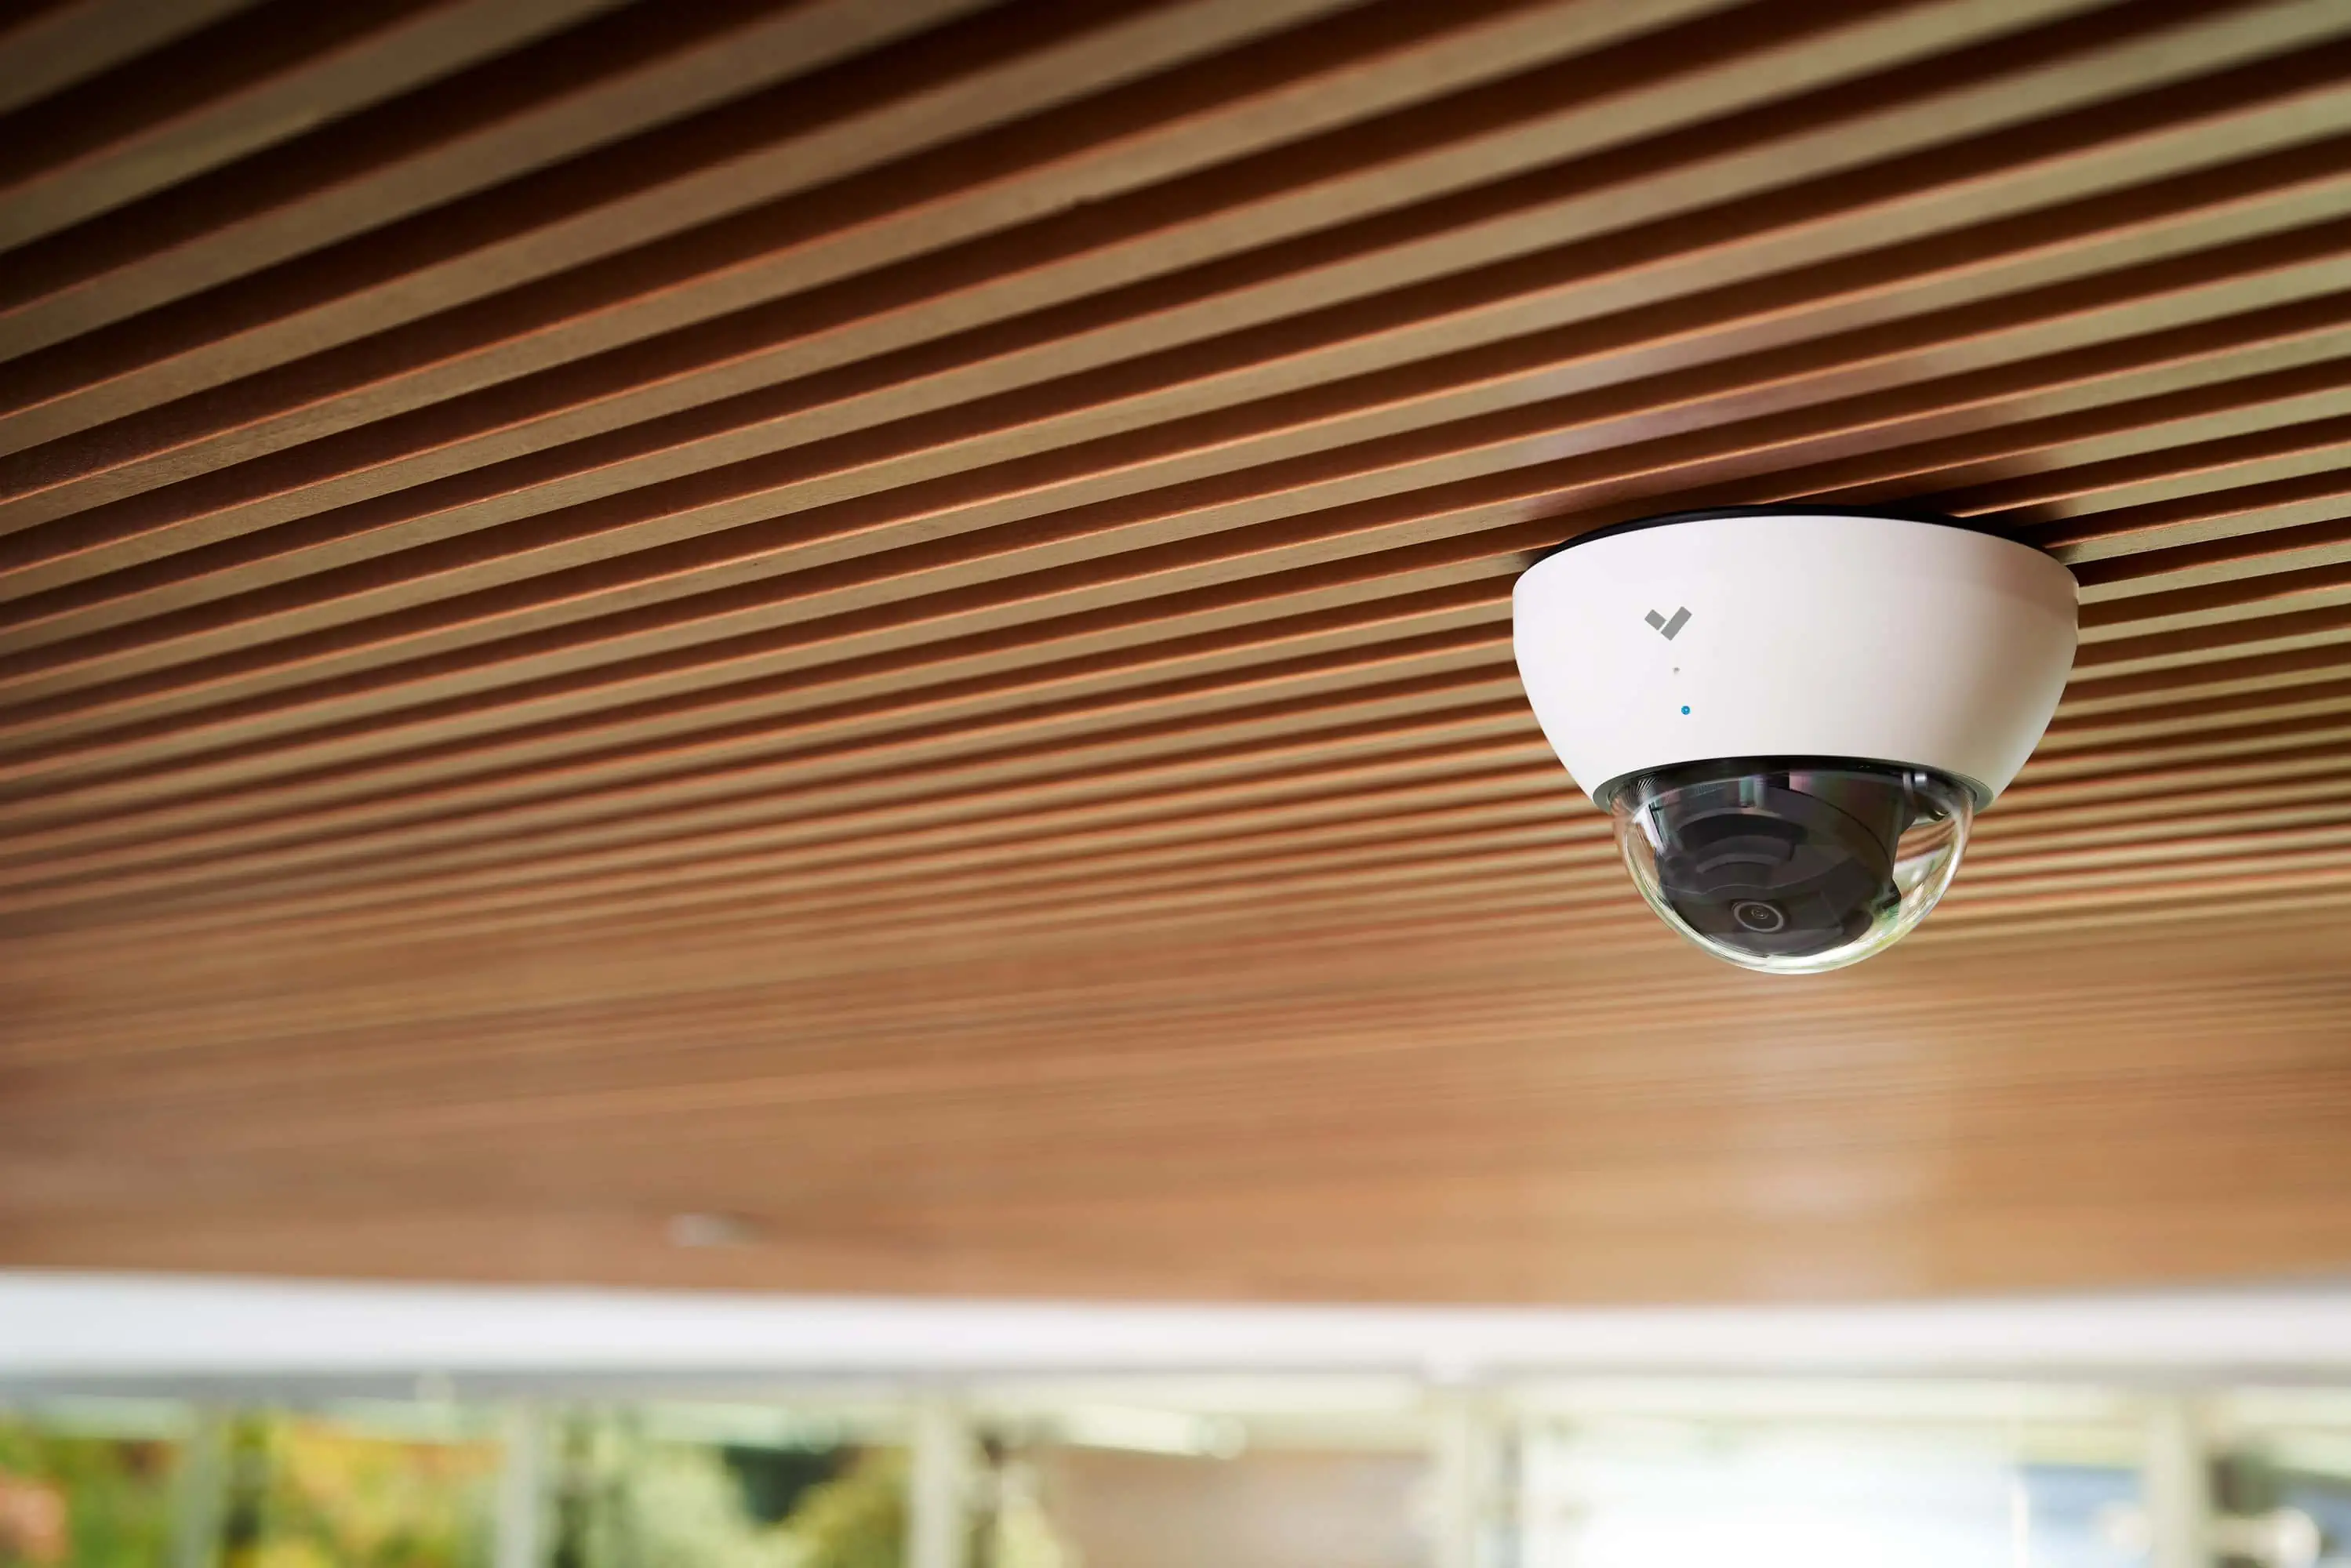 Verkada dome camera that records 24/7 mounted on the cieling